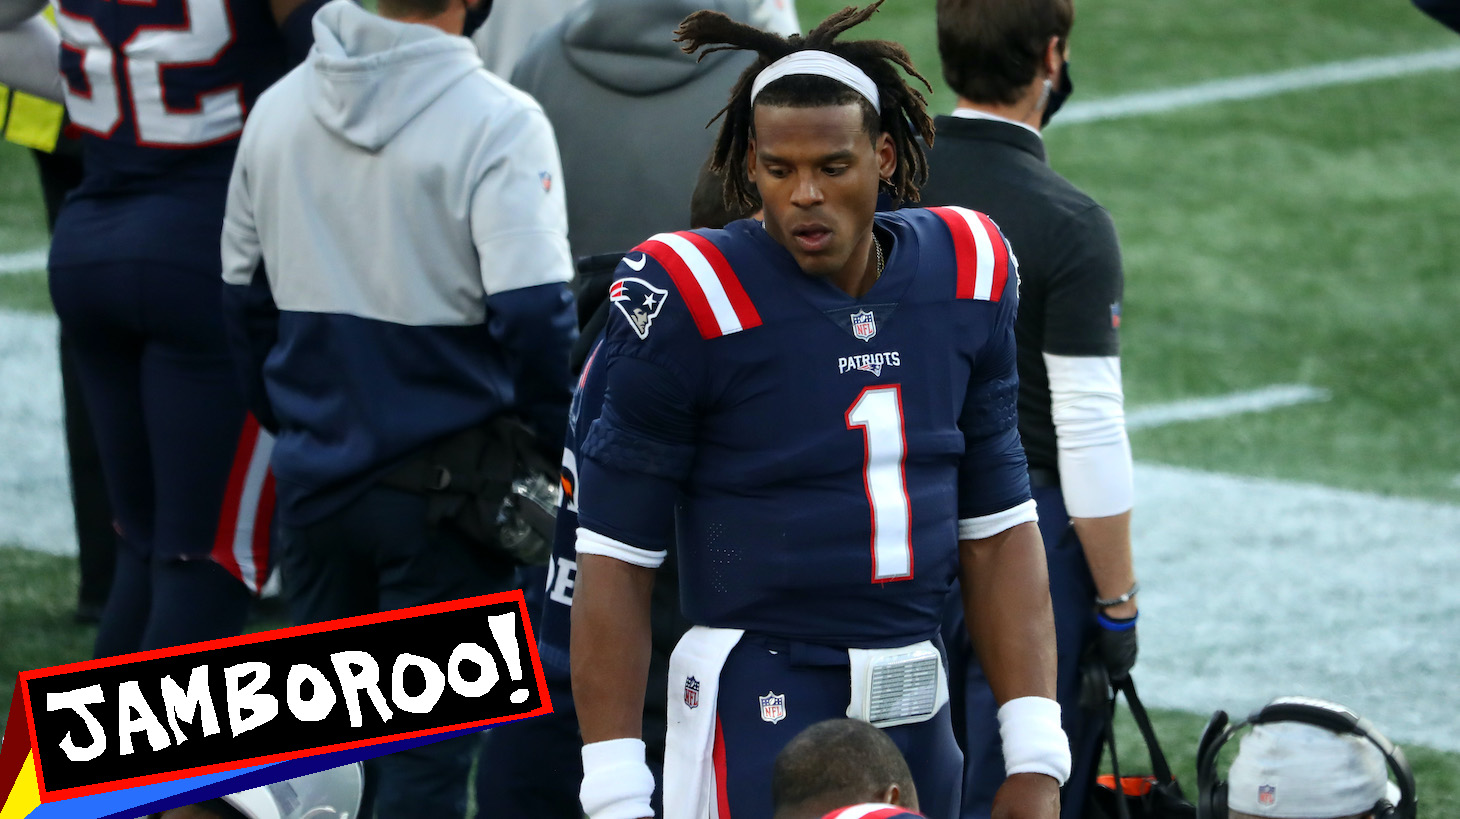 FOXBOROUGH, MASSACHUSETTS - OCTOBER 25:Cam Newton #1 of the New England Patriots looks on from the bench during the game against the San Francisco 49ers at Gillette Stadium on October 25, 2020 in Foxborough, Massachusetts. (Photo by Maddie Meyer/Getty Images)